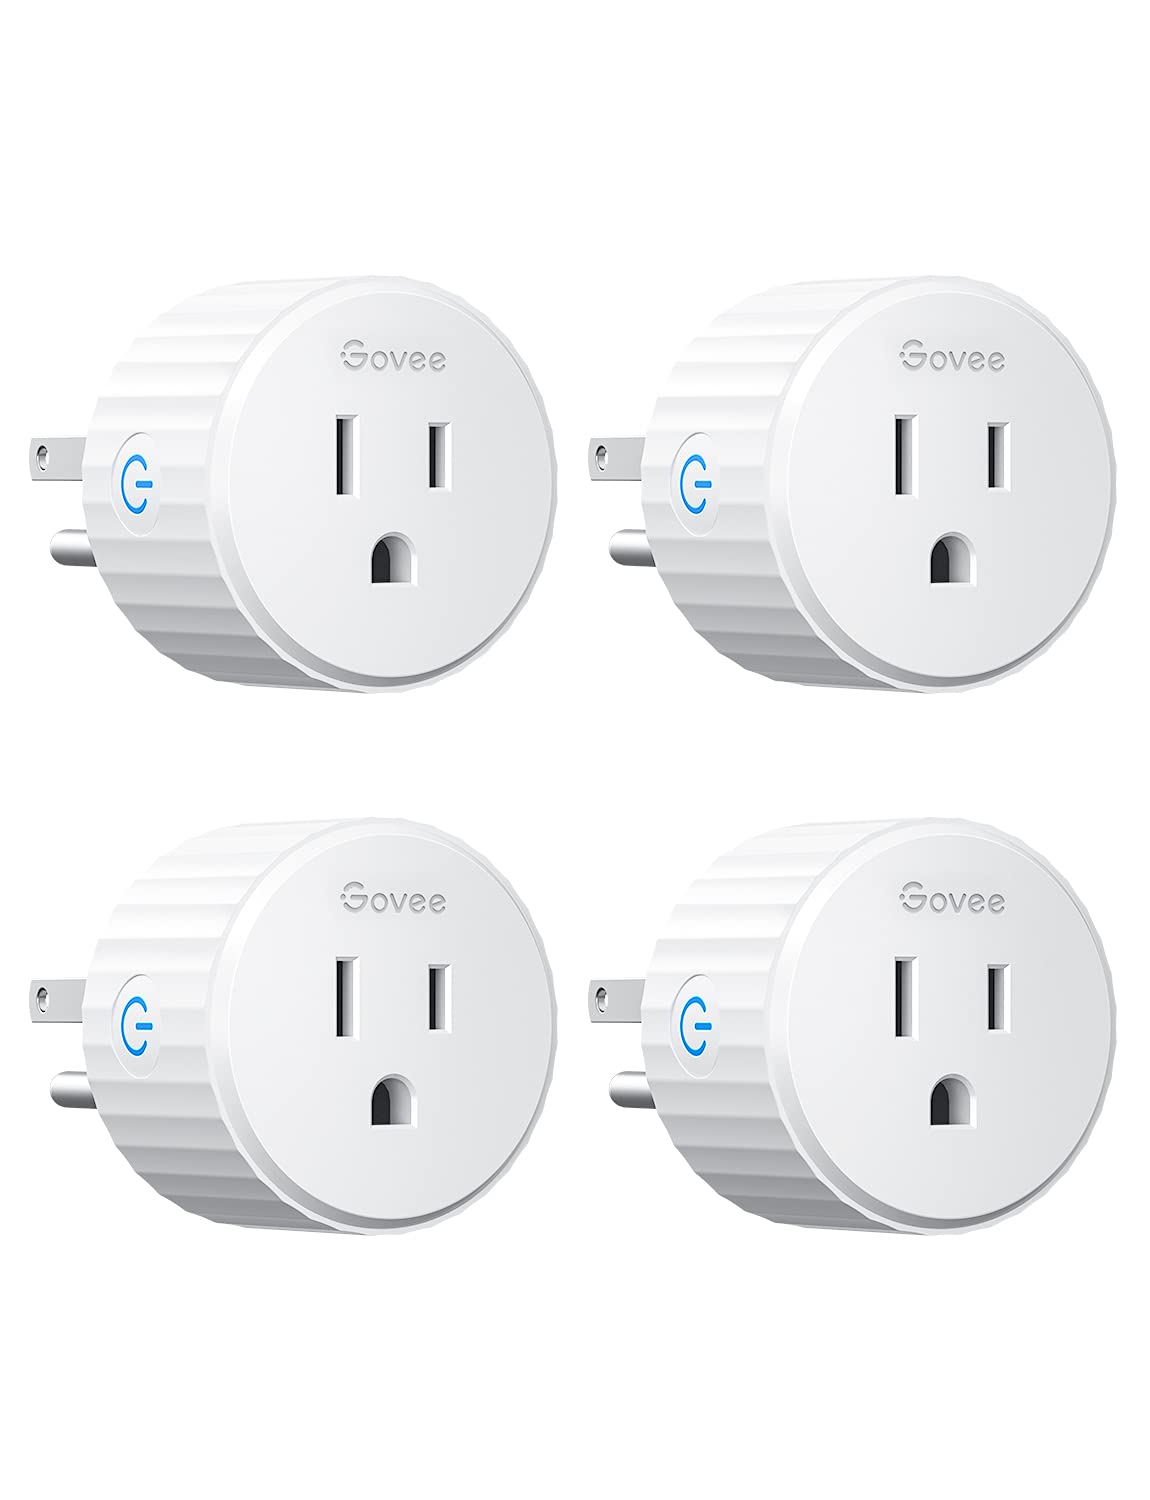 Govee 2.4Ghz WiFi Smart Plug, 4 Pack Works with Alexa and Google Assistant, No Hub $12 Amazon